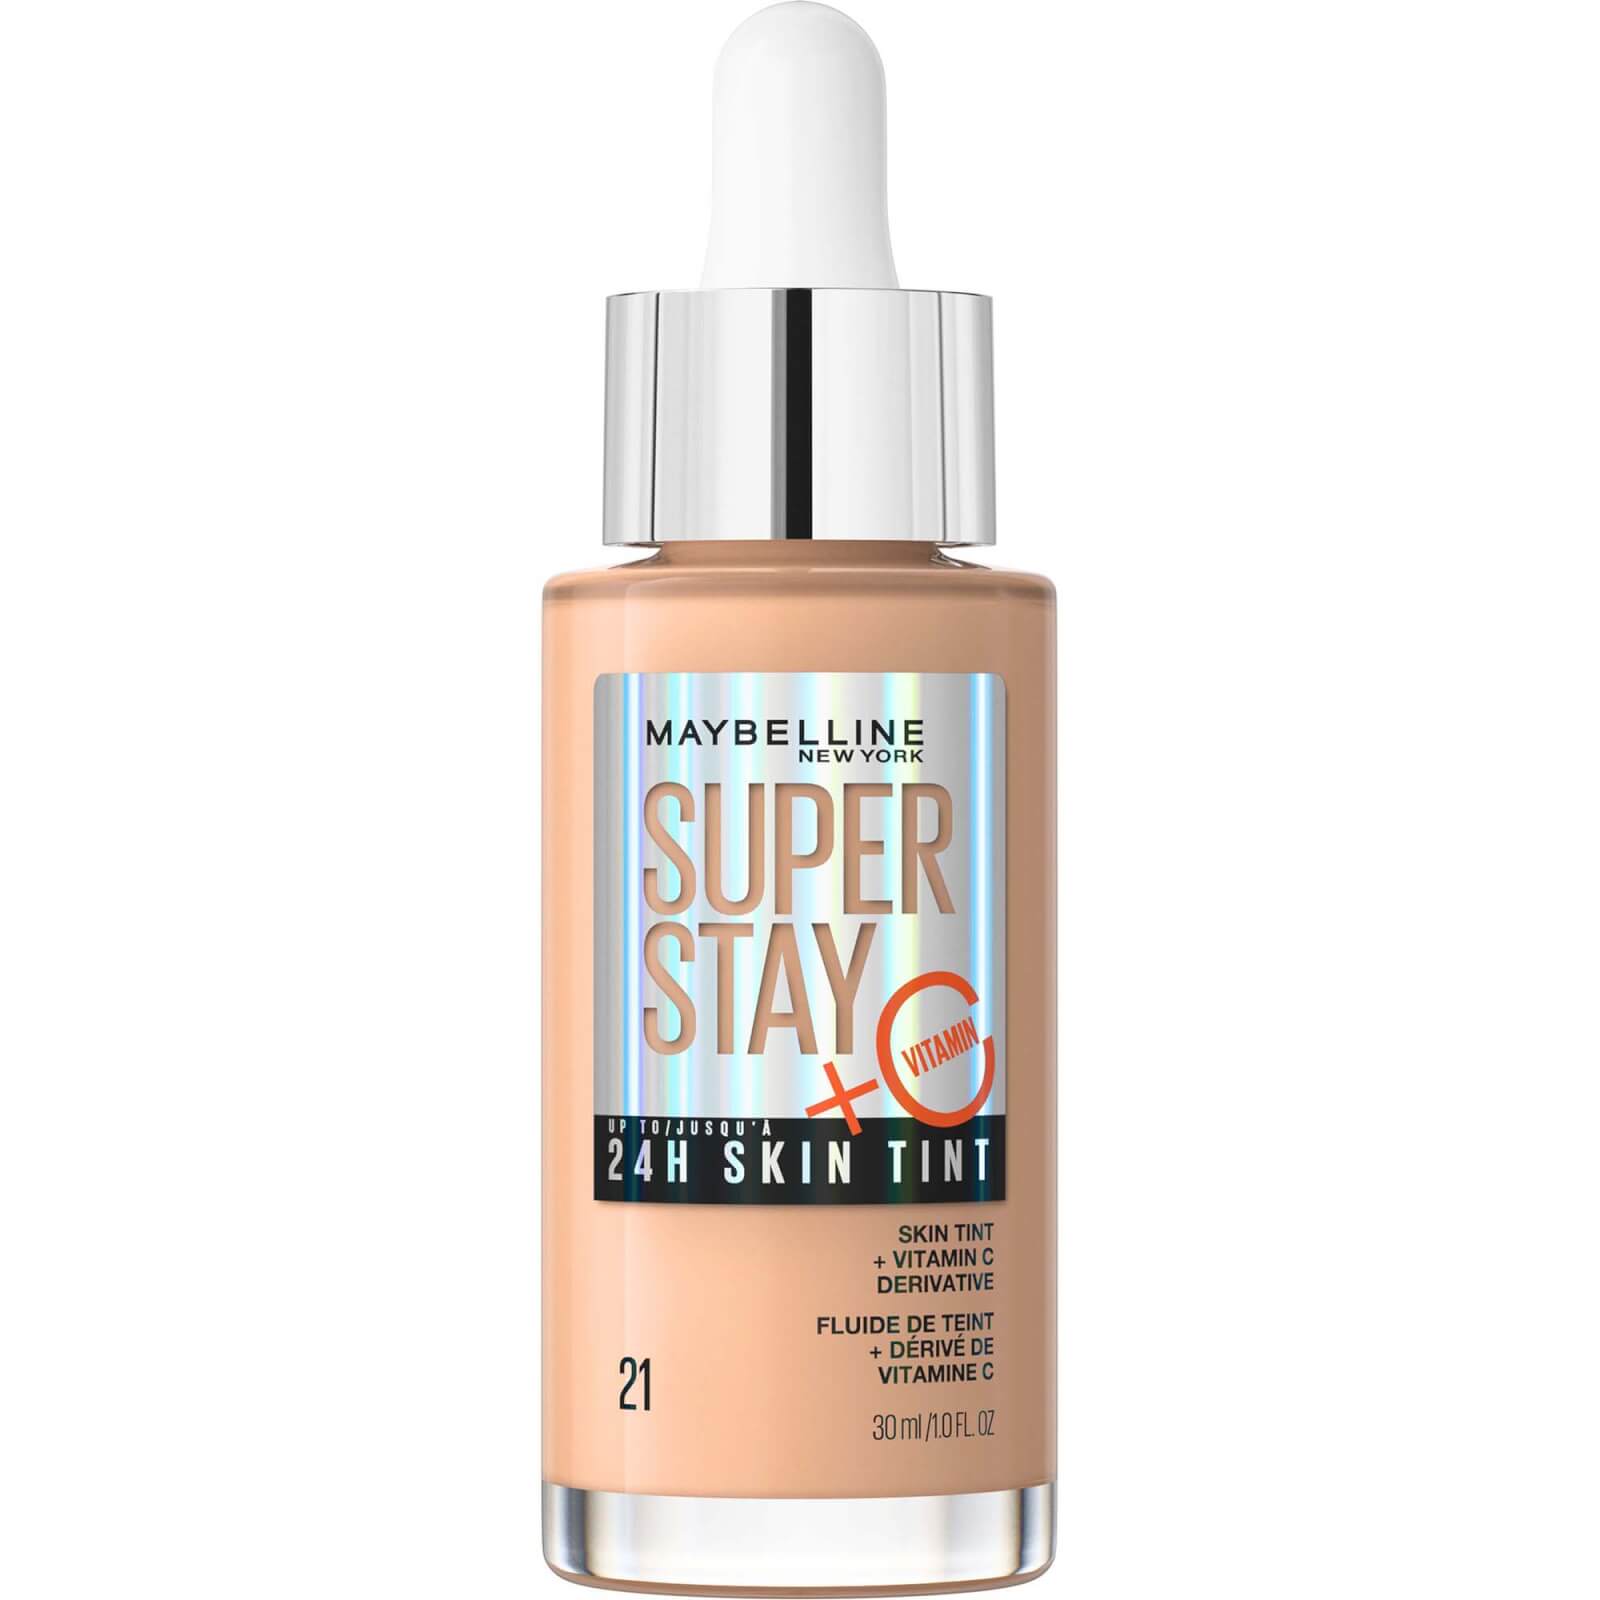 Maybelline Super Stay up to 24H Skin Tint Foundation + Vitamin C 30ml (Various Shades) - 21